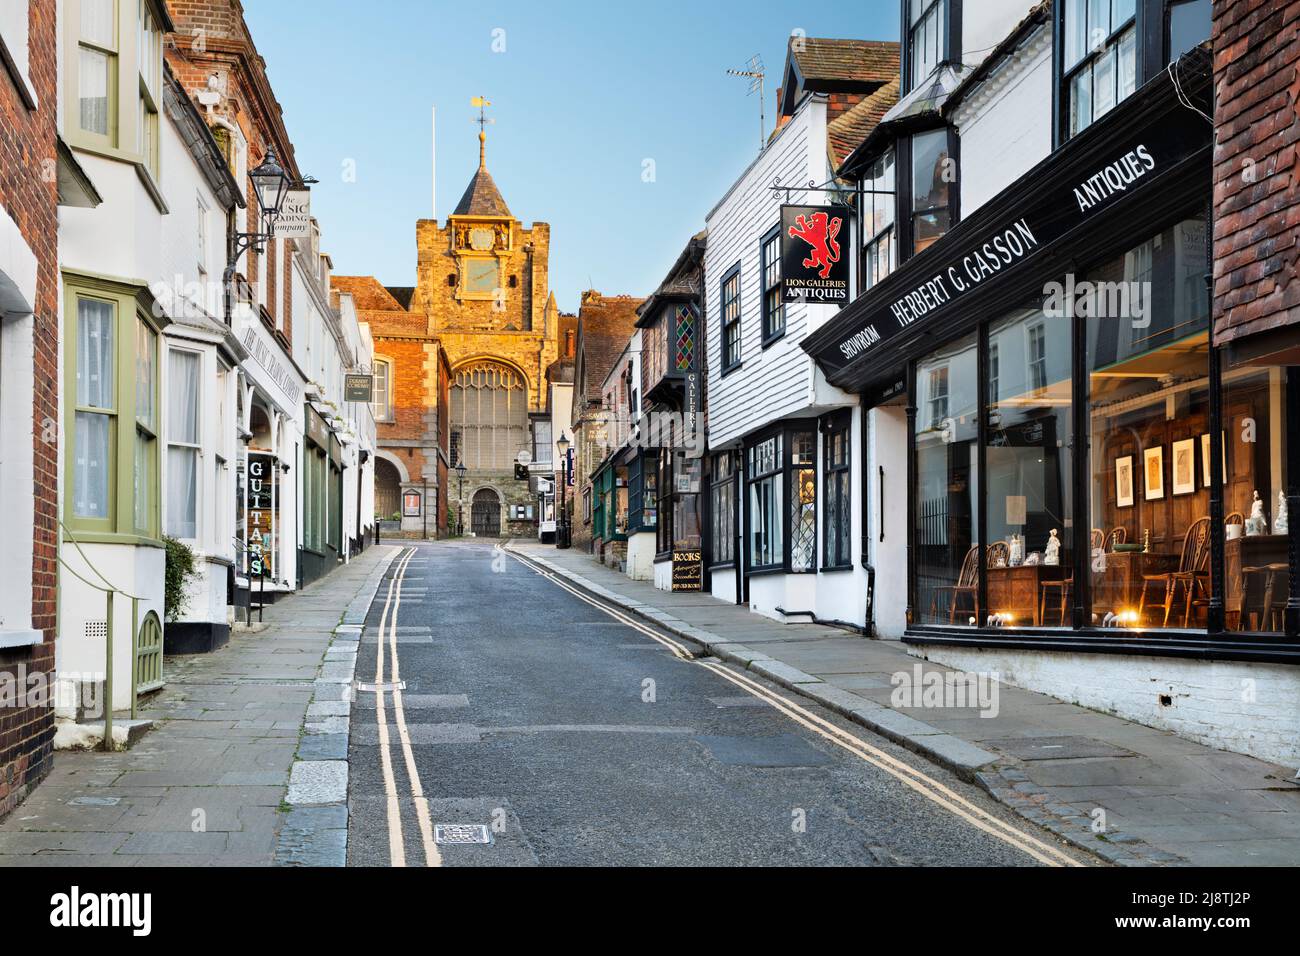 Shops along Lion Street with Church of Saint Mary in evening sunlight, Rye, East Sussex, England, United Kingdom, Europe Stock Photo